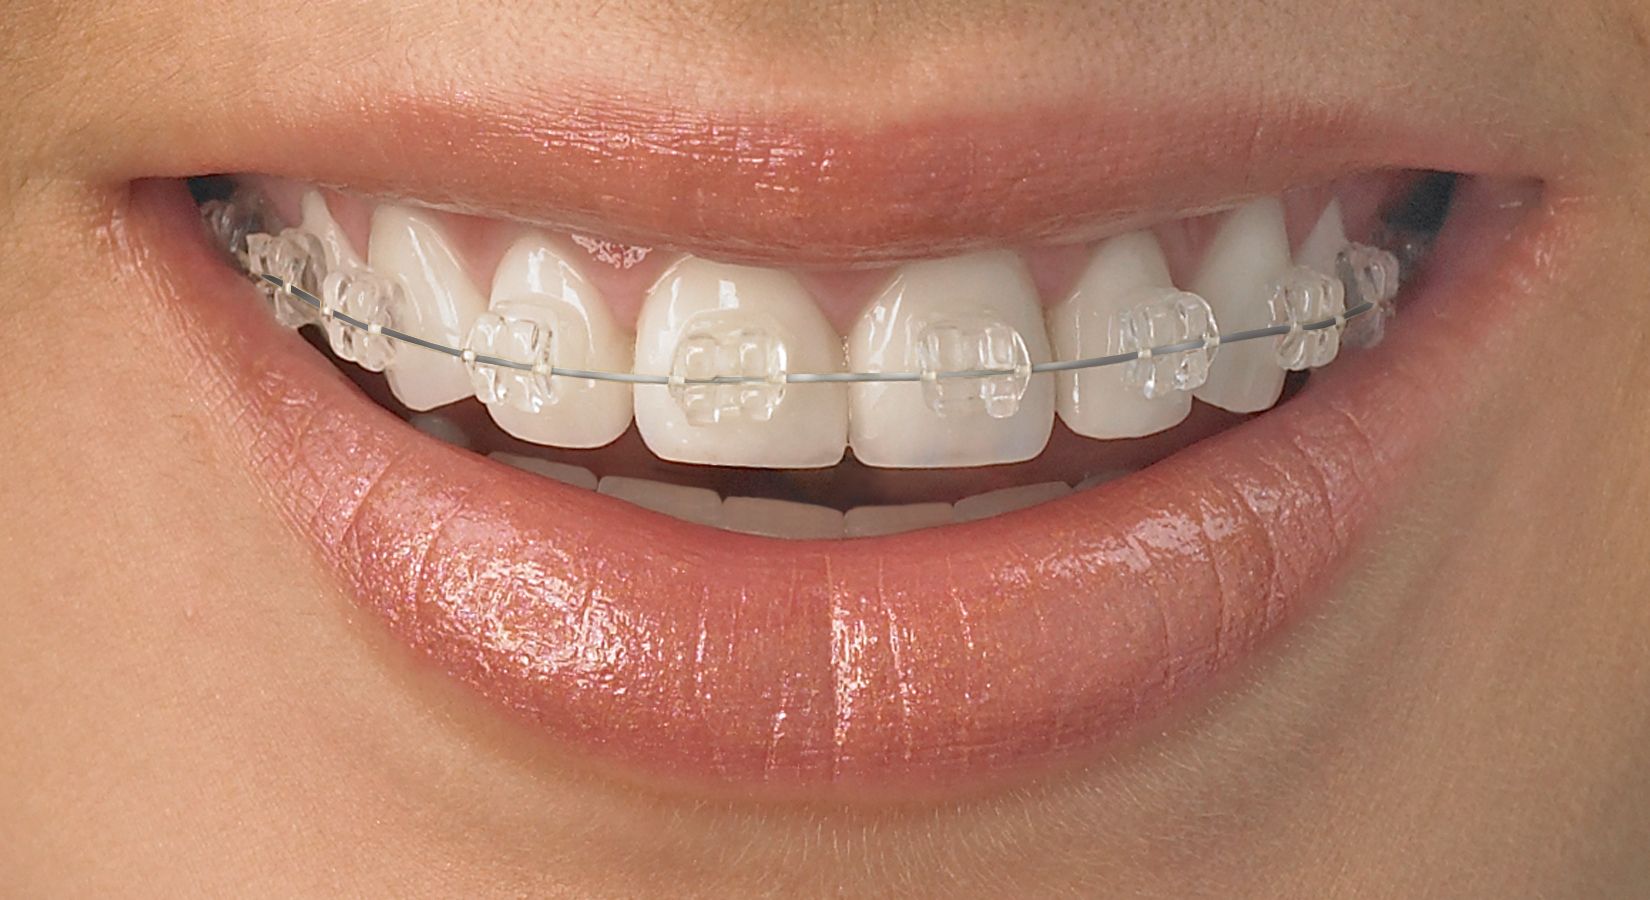 Ceramic braces use a system of arch wires and porcelain tooth-colored brackets for the purpose of aligning teeth and adjusting bite.